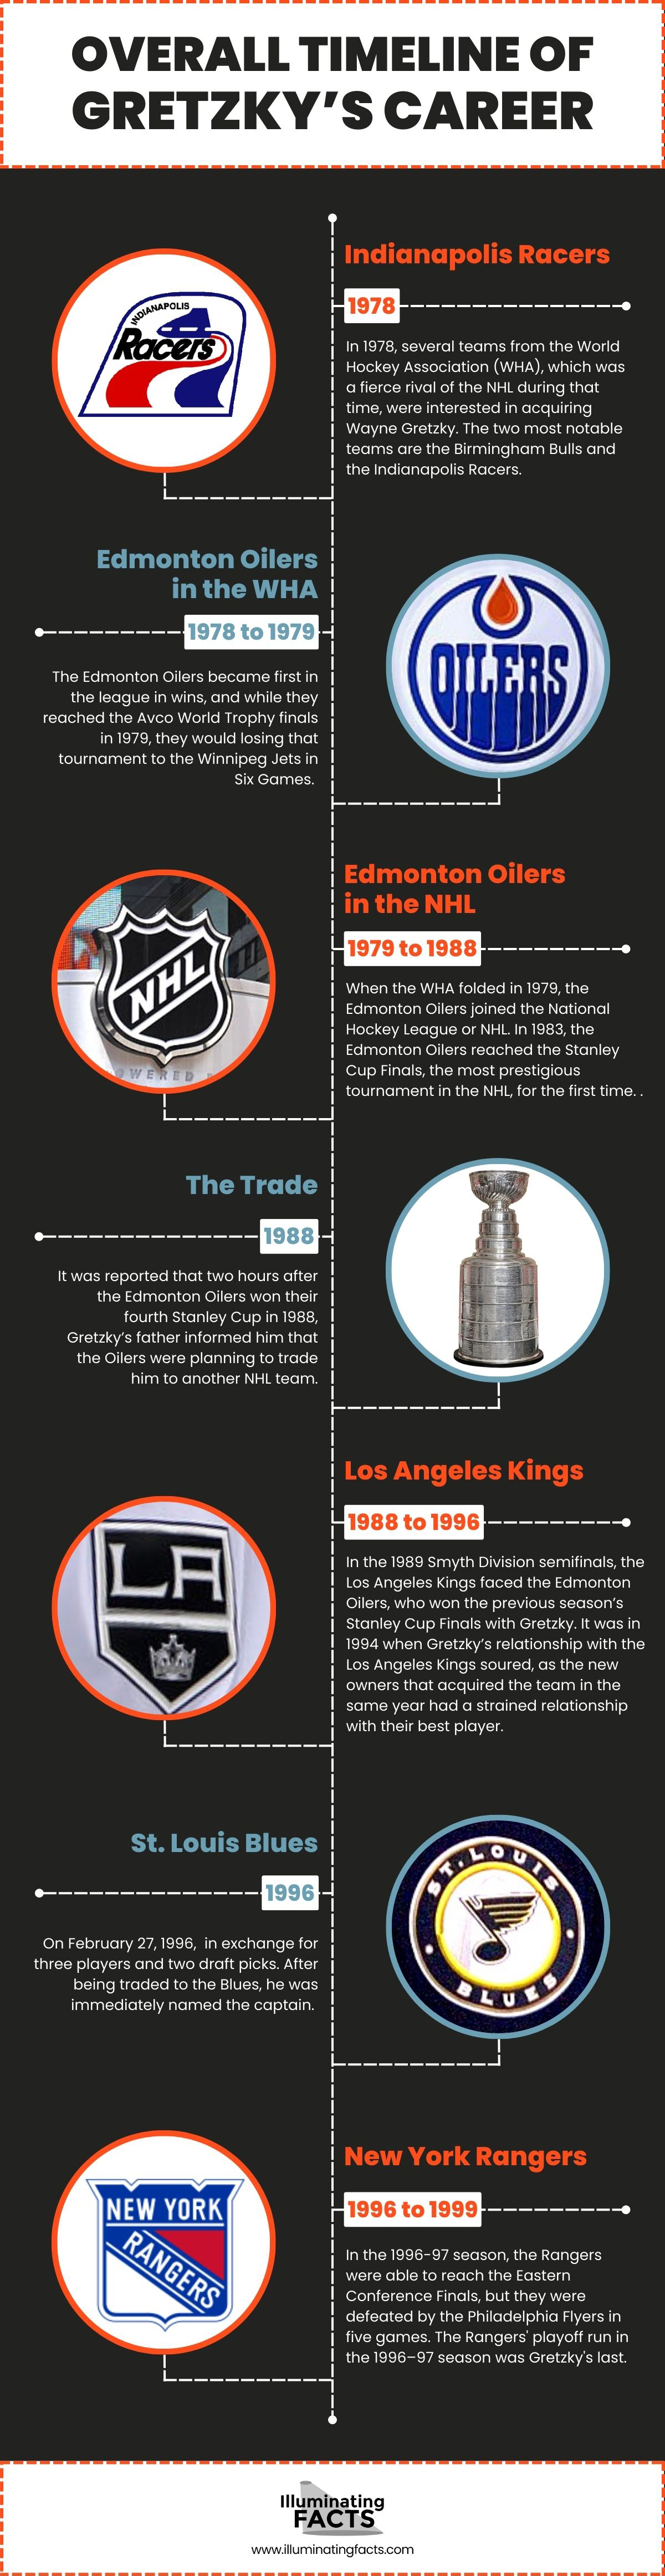 Overall Timeline of Gretzky’s Career